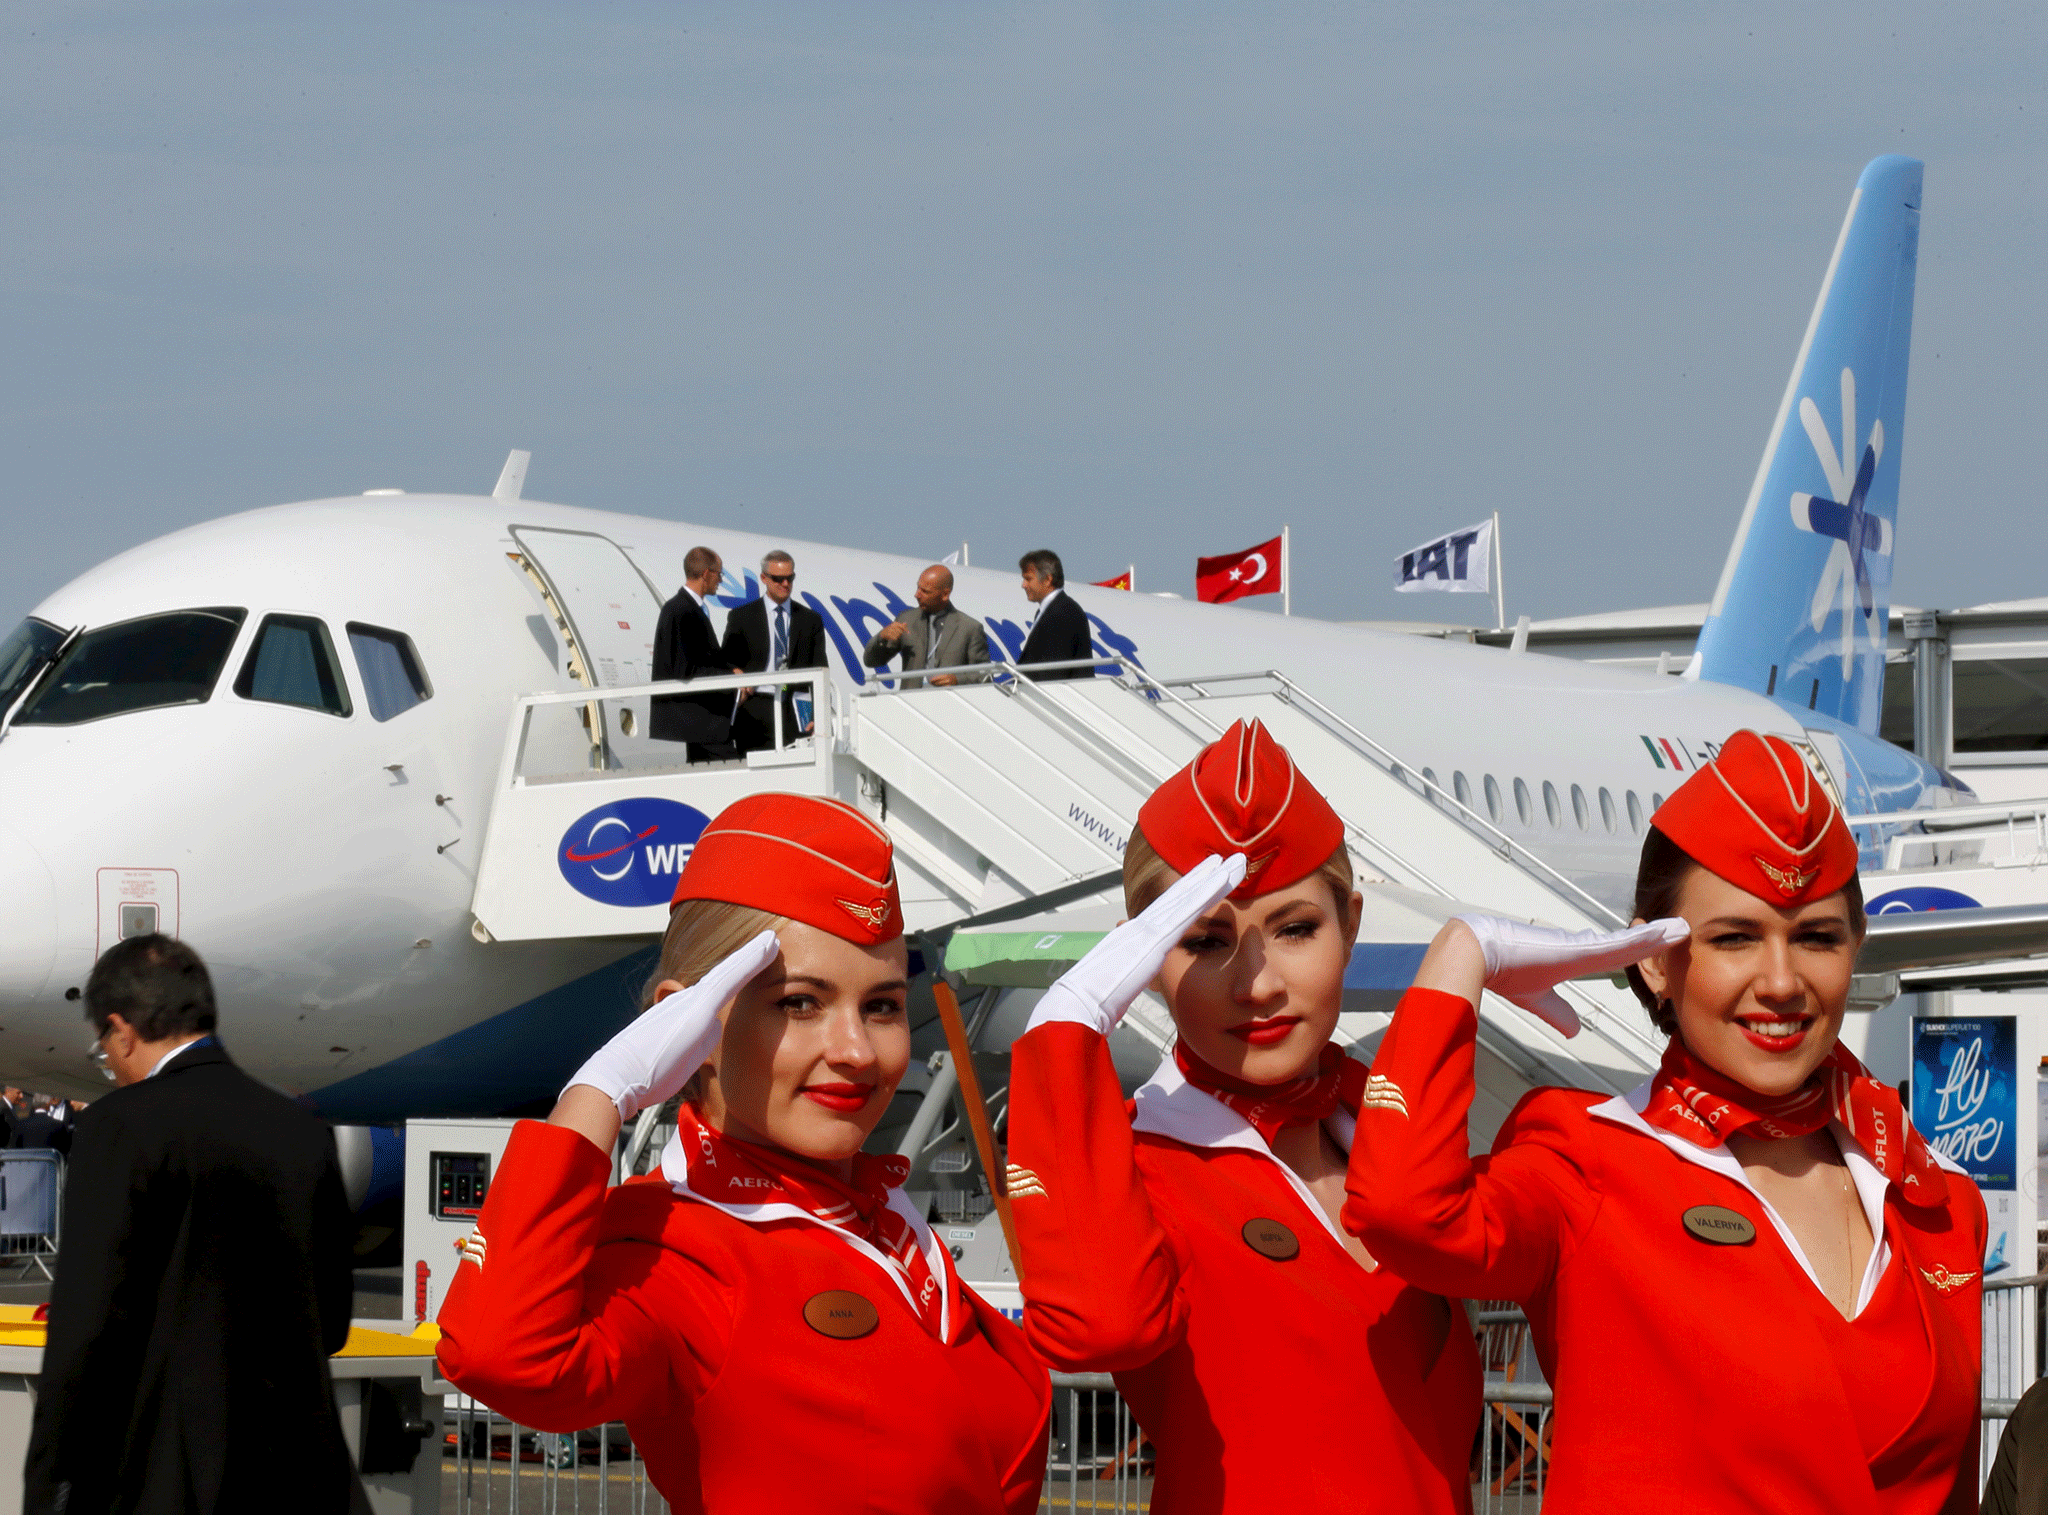 “Constructive observations regarding appearance, adherence to dress codes, application of make-up etc. may be made as part of regular training,” Aeroflot said